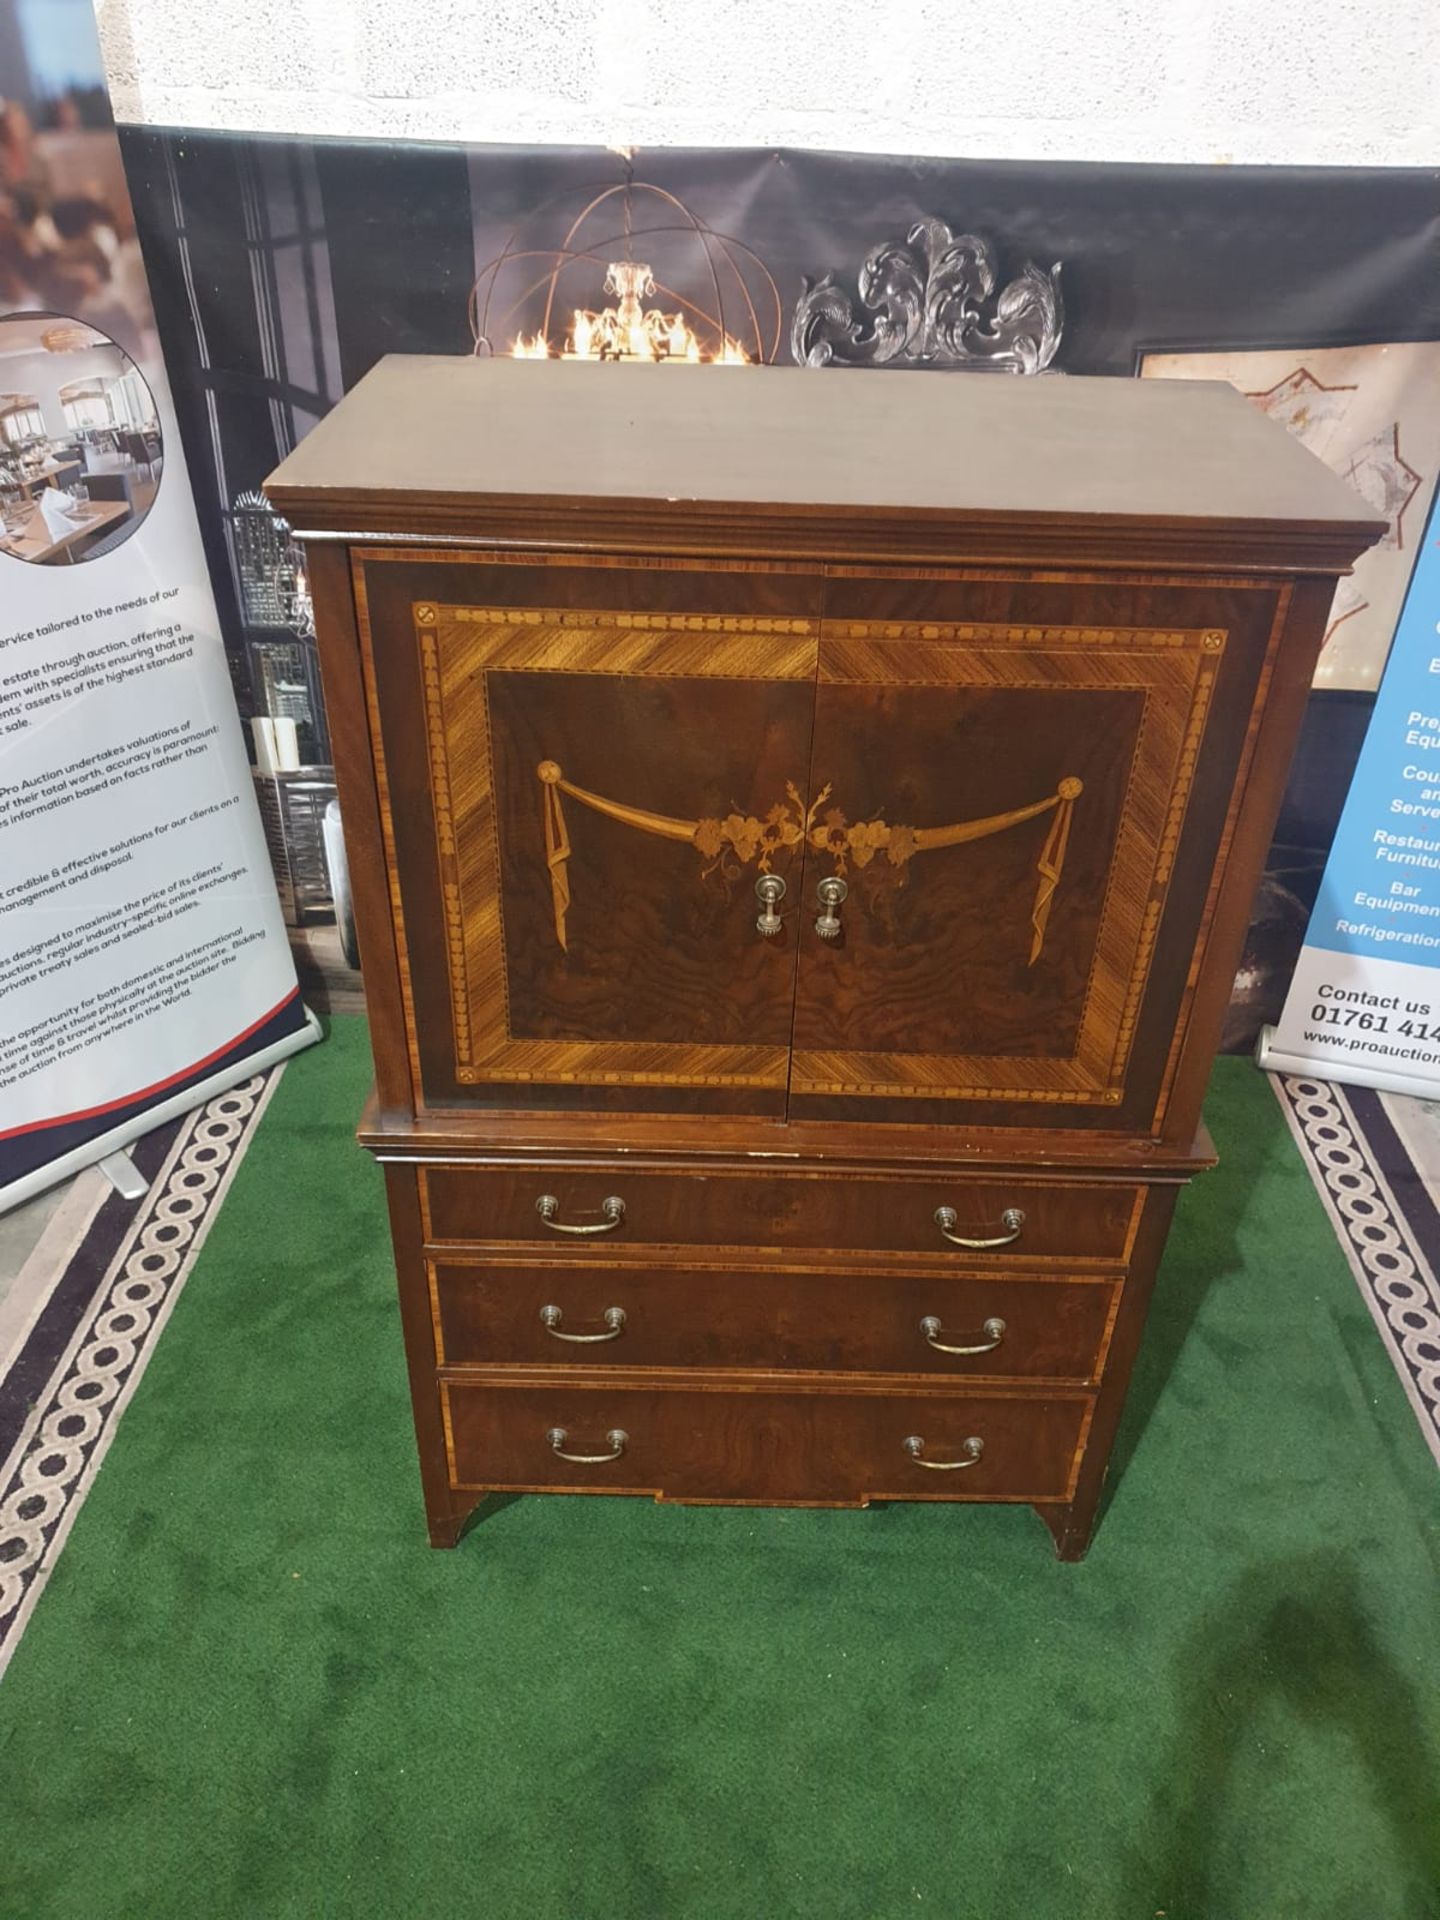 A Georgian style reproduction TV cabinet with three drawers under in mahogany veneers with a classic